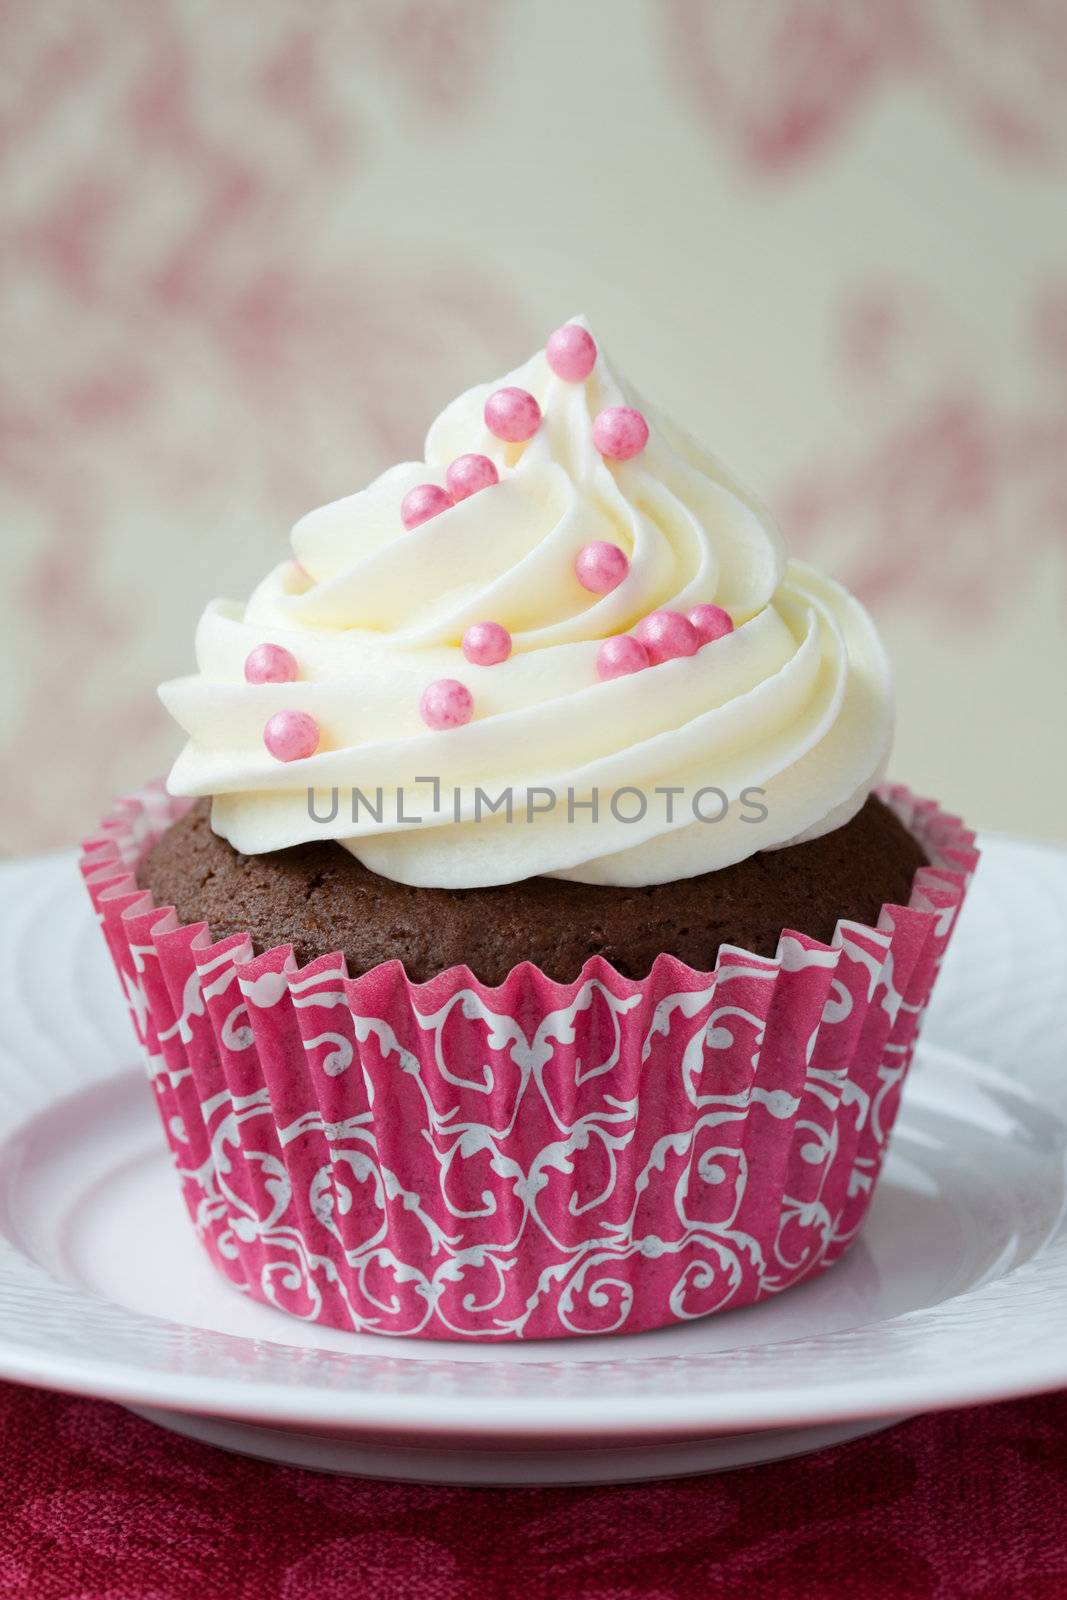 Chocolate cupcake decorated with frosting and pink dragees